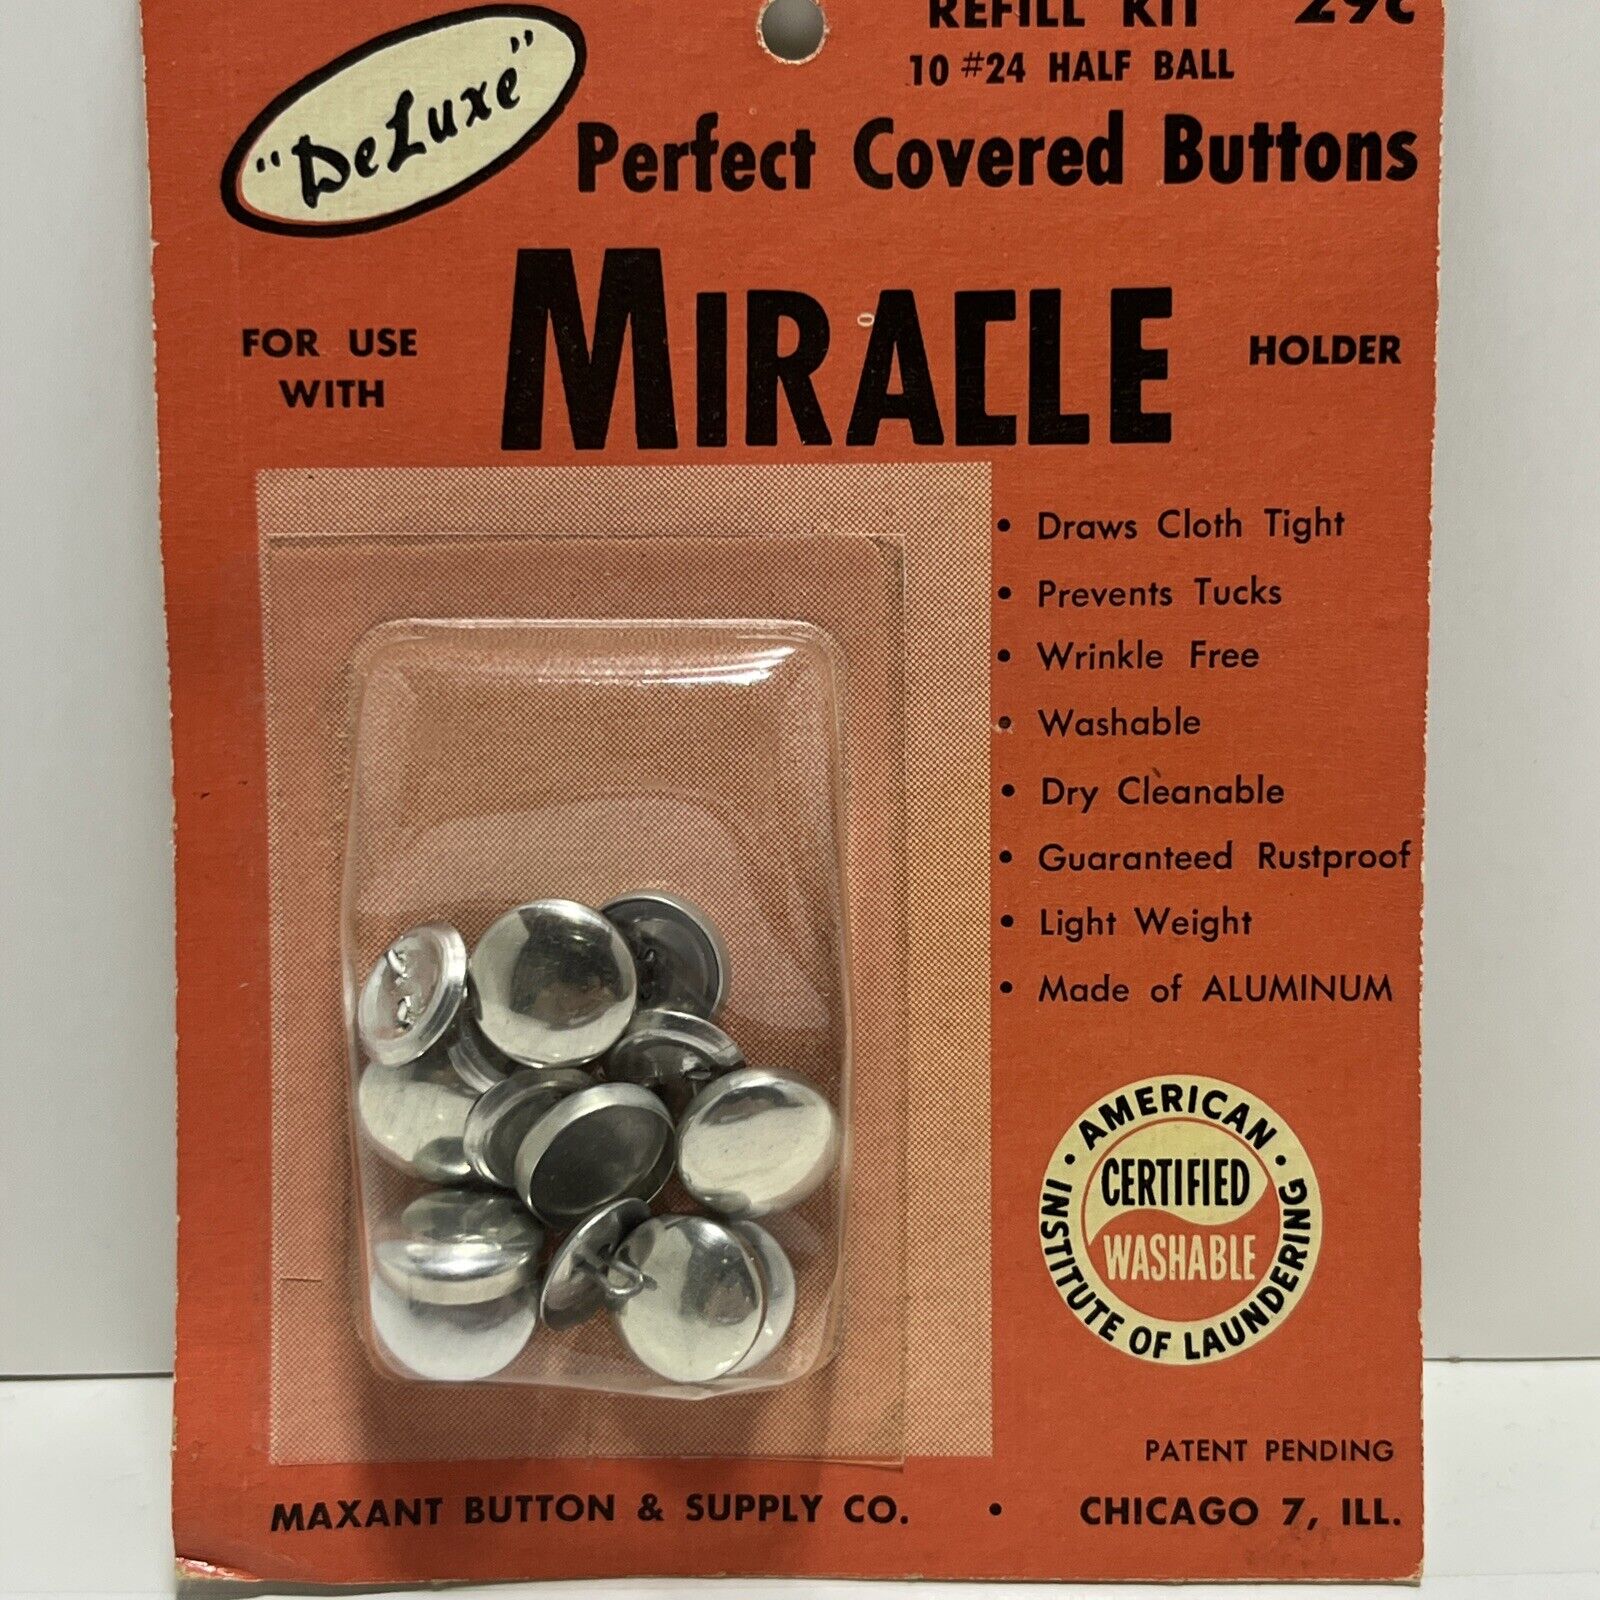 Vintage DeLuxe Perfect Covered Buttons Refill Kit Brand New In Original Box